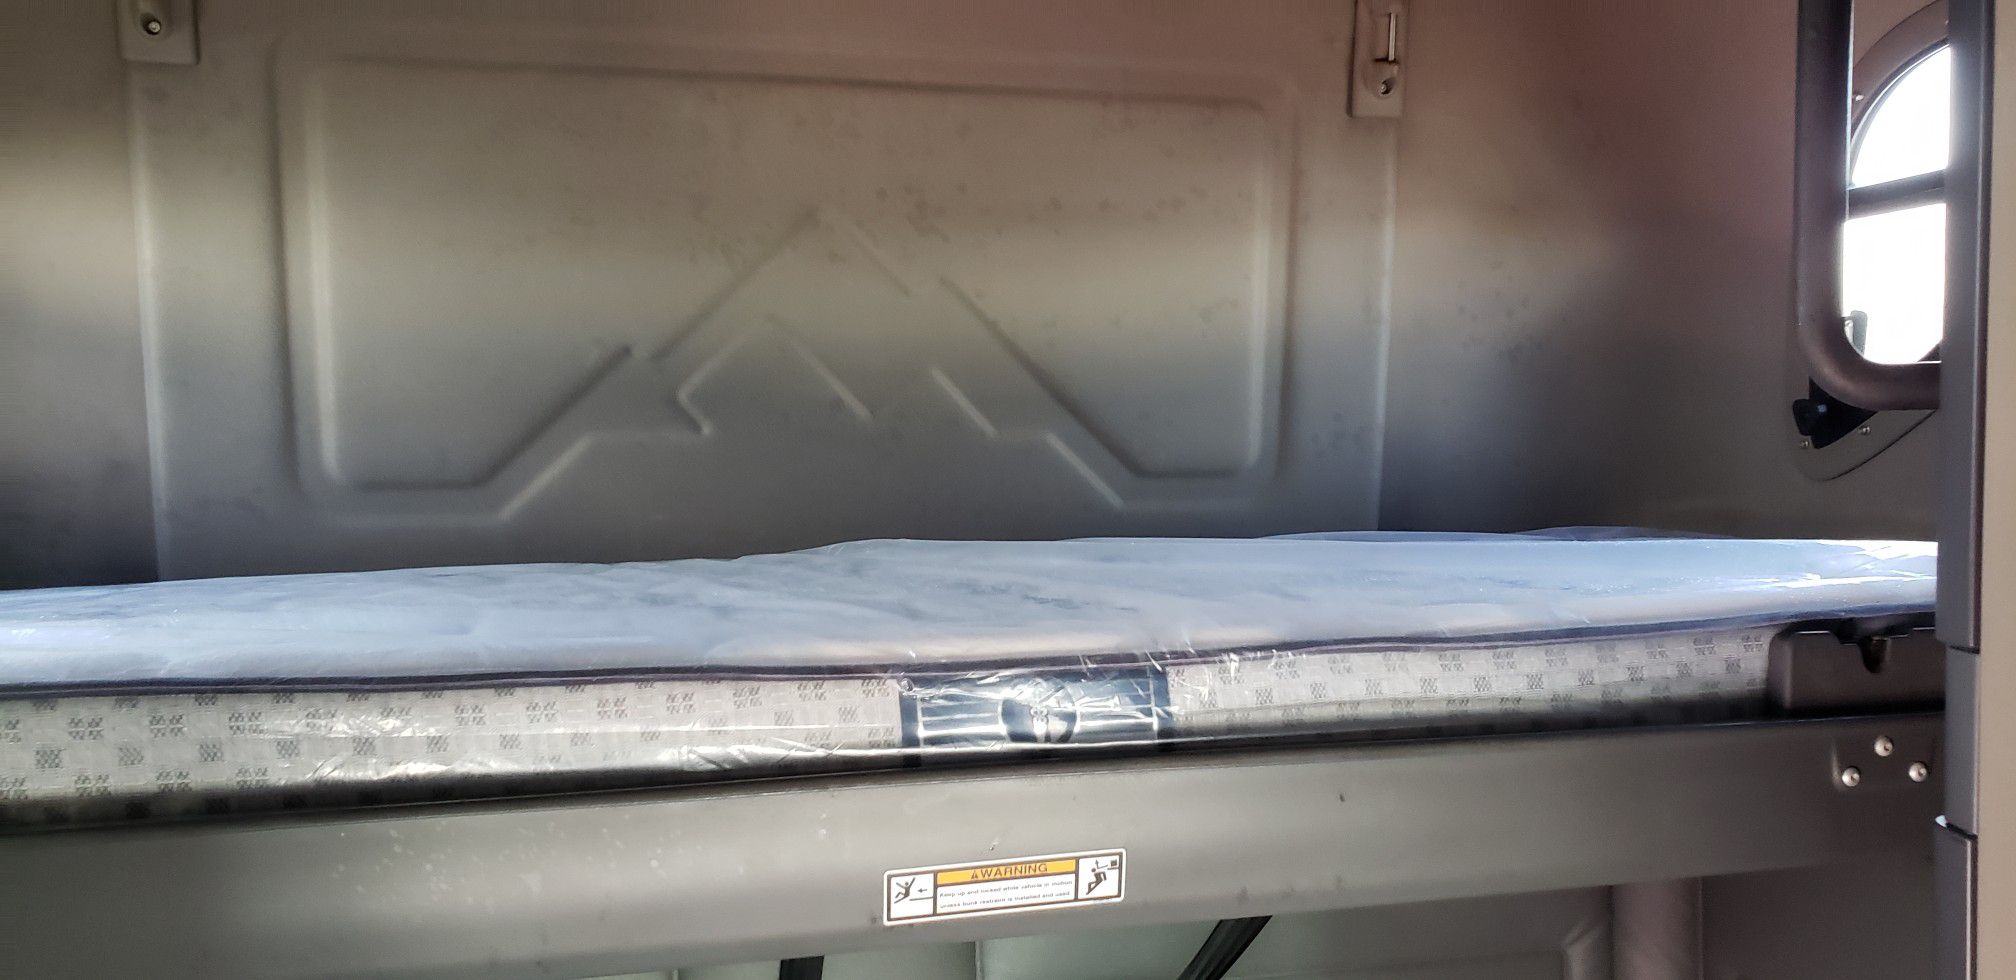 Tractor trailer, RV, motor home and any cutom made mattress